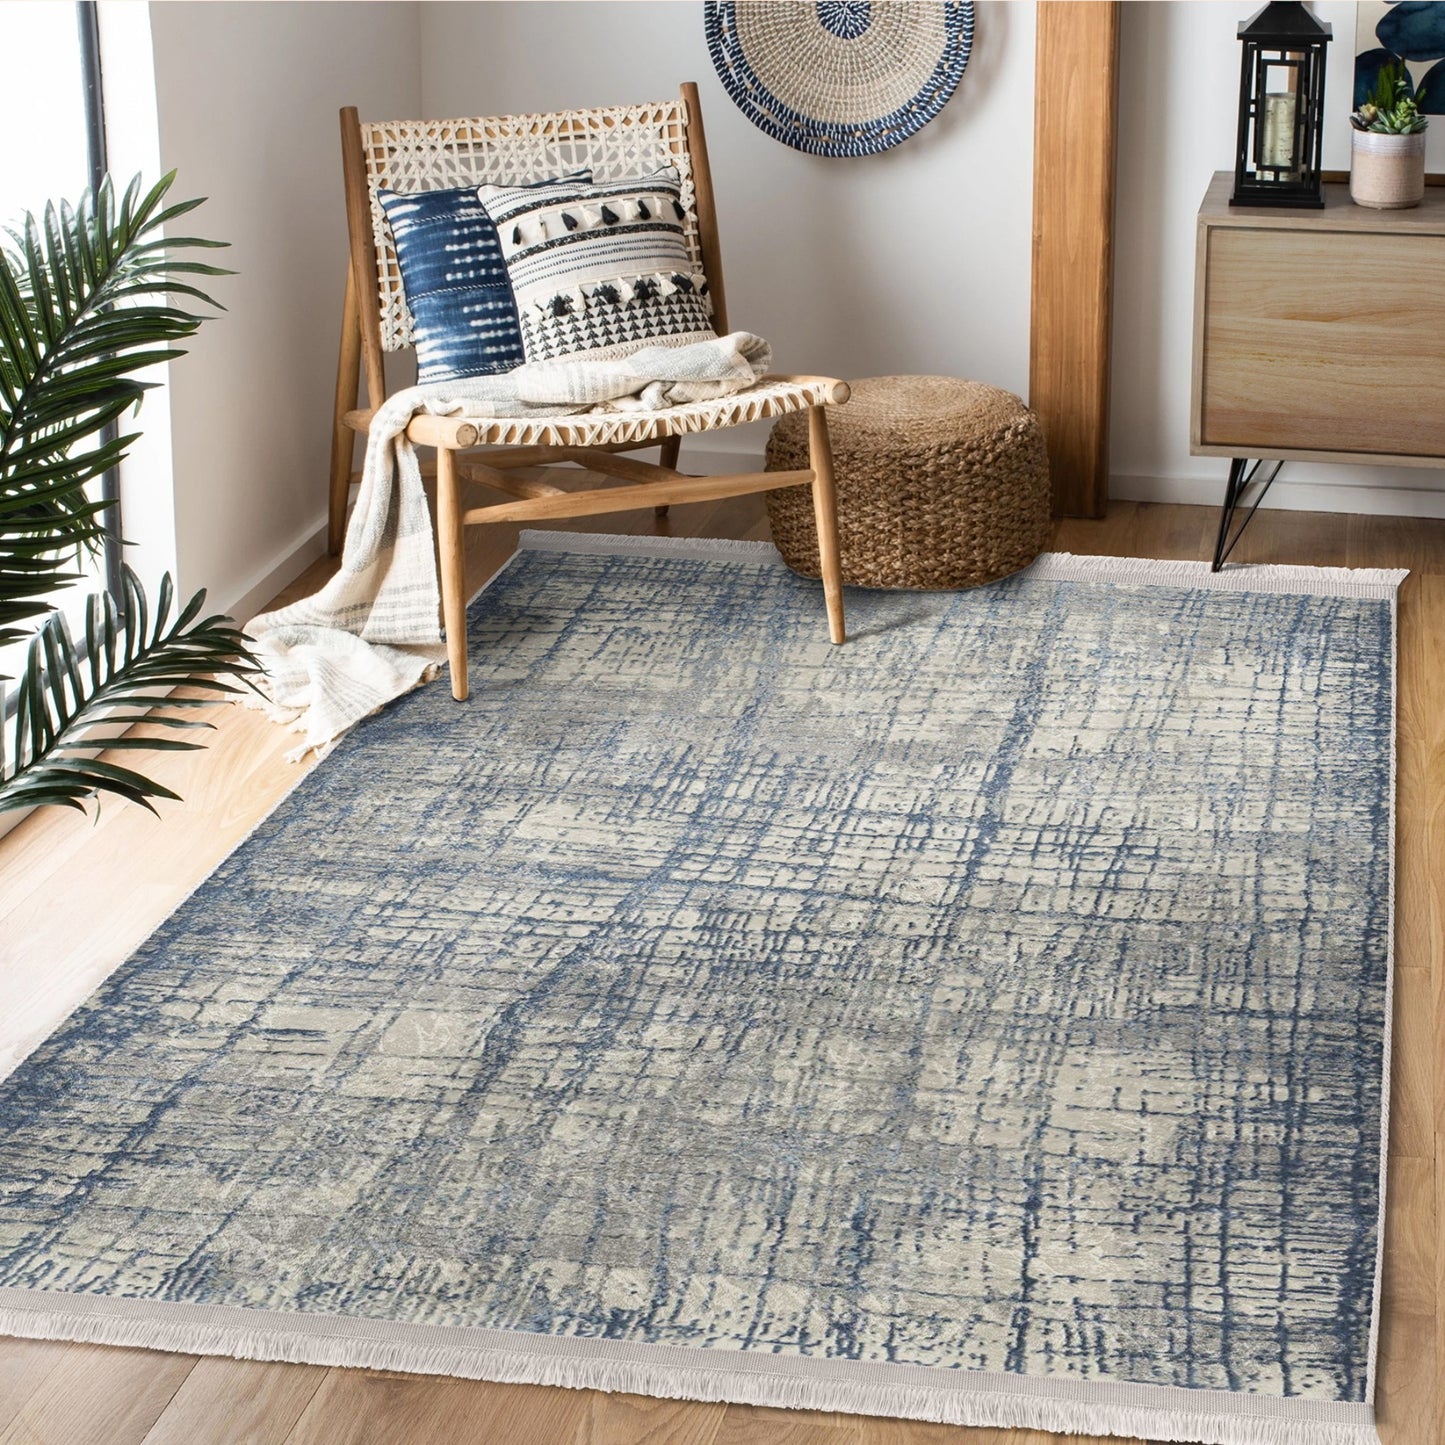 Elegant Rug with Rustic Harmony for Cozy Home Decor